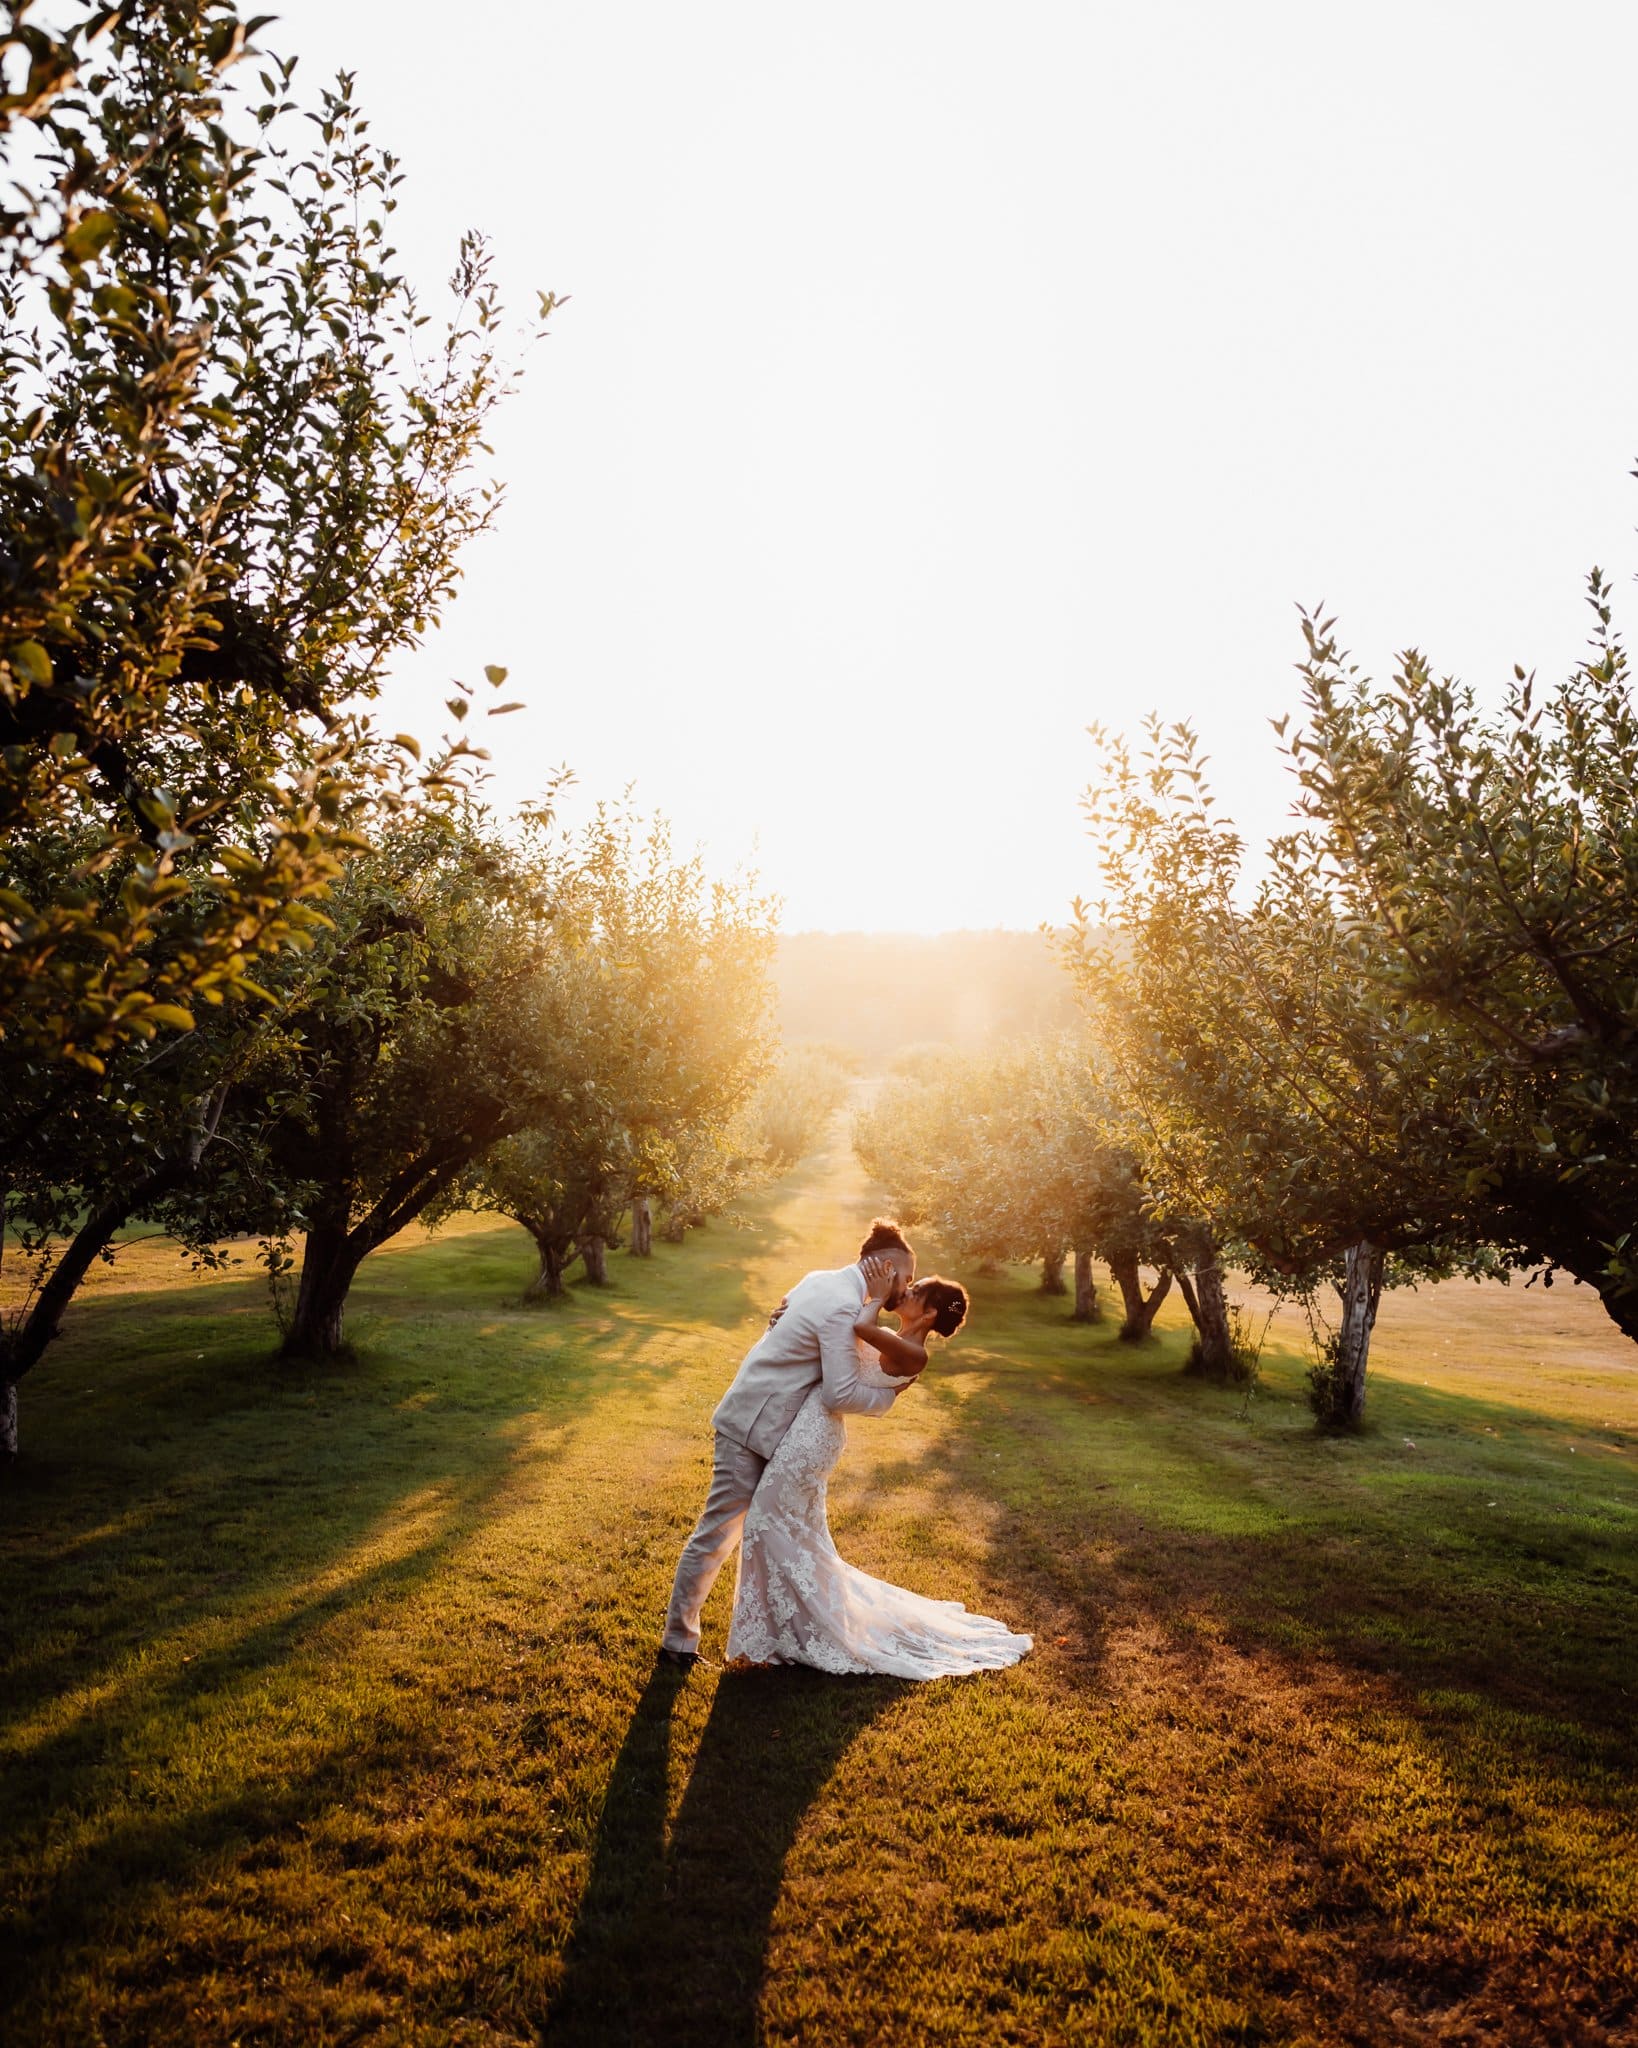 I didn't groom kissing in an apple orchard at sunset